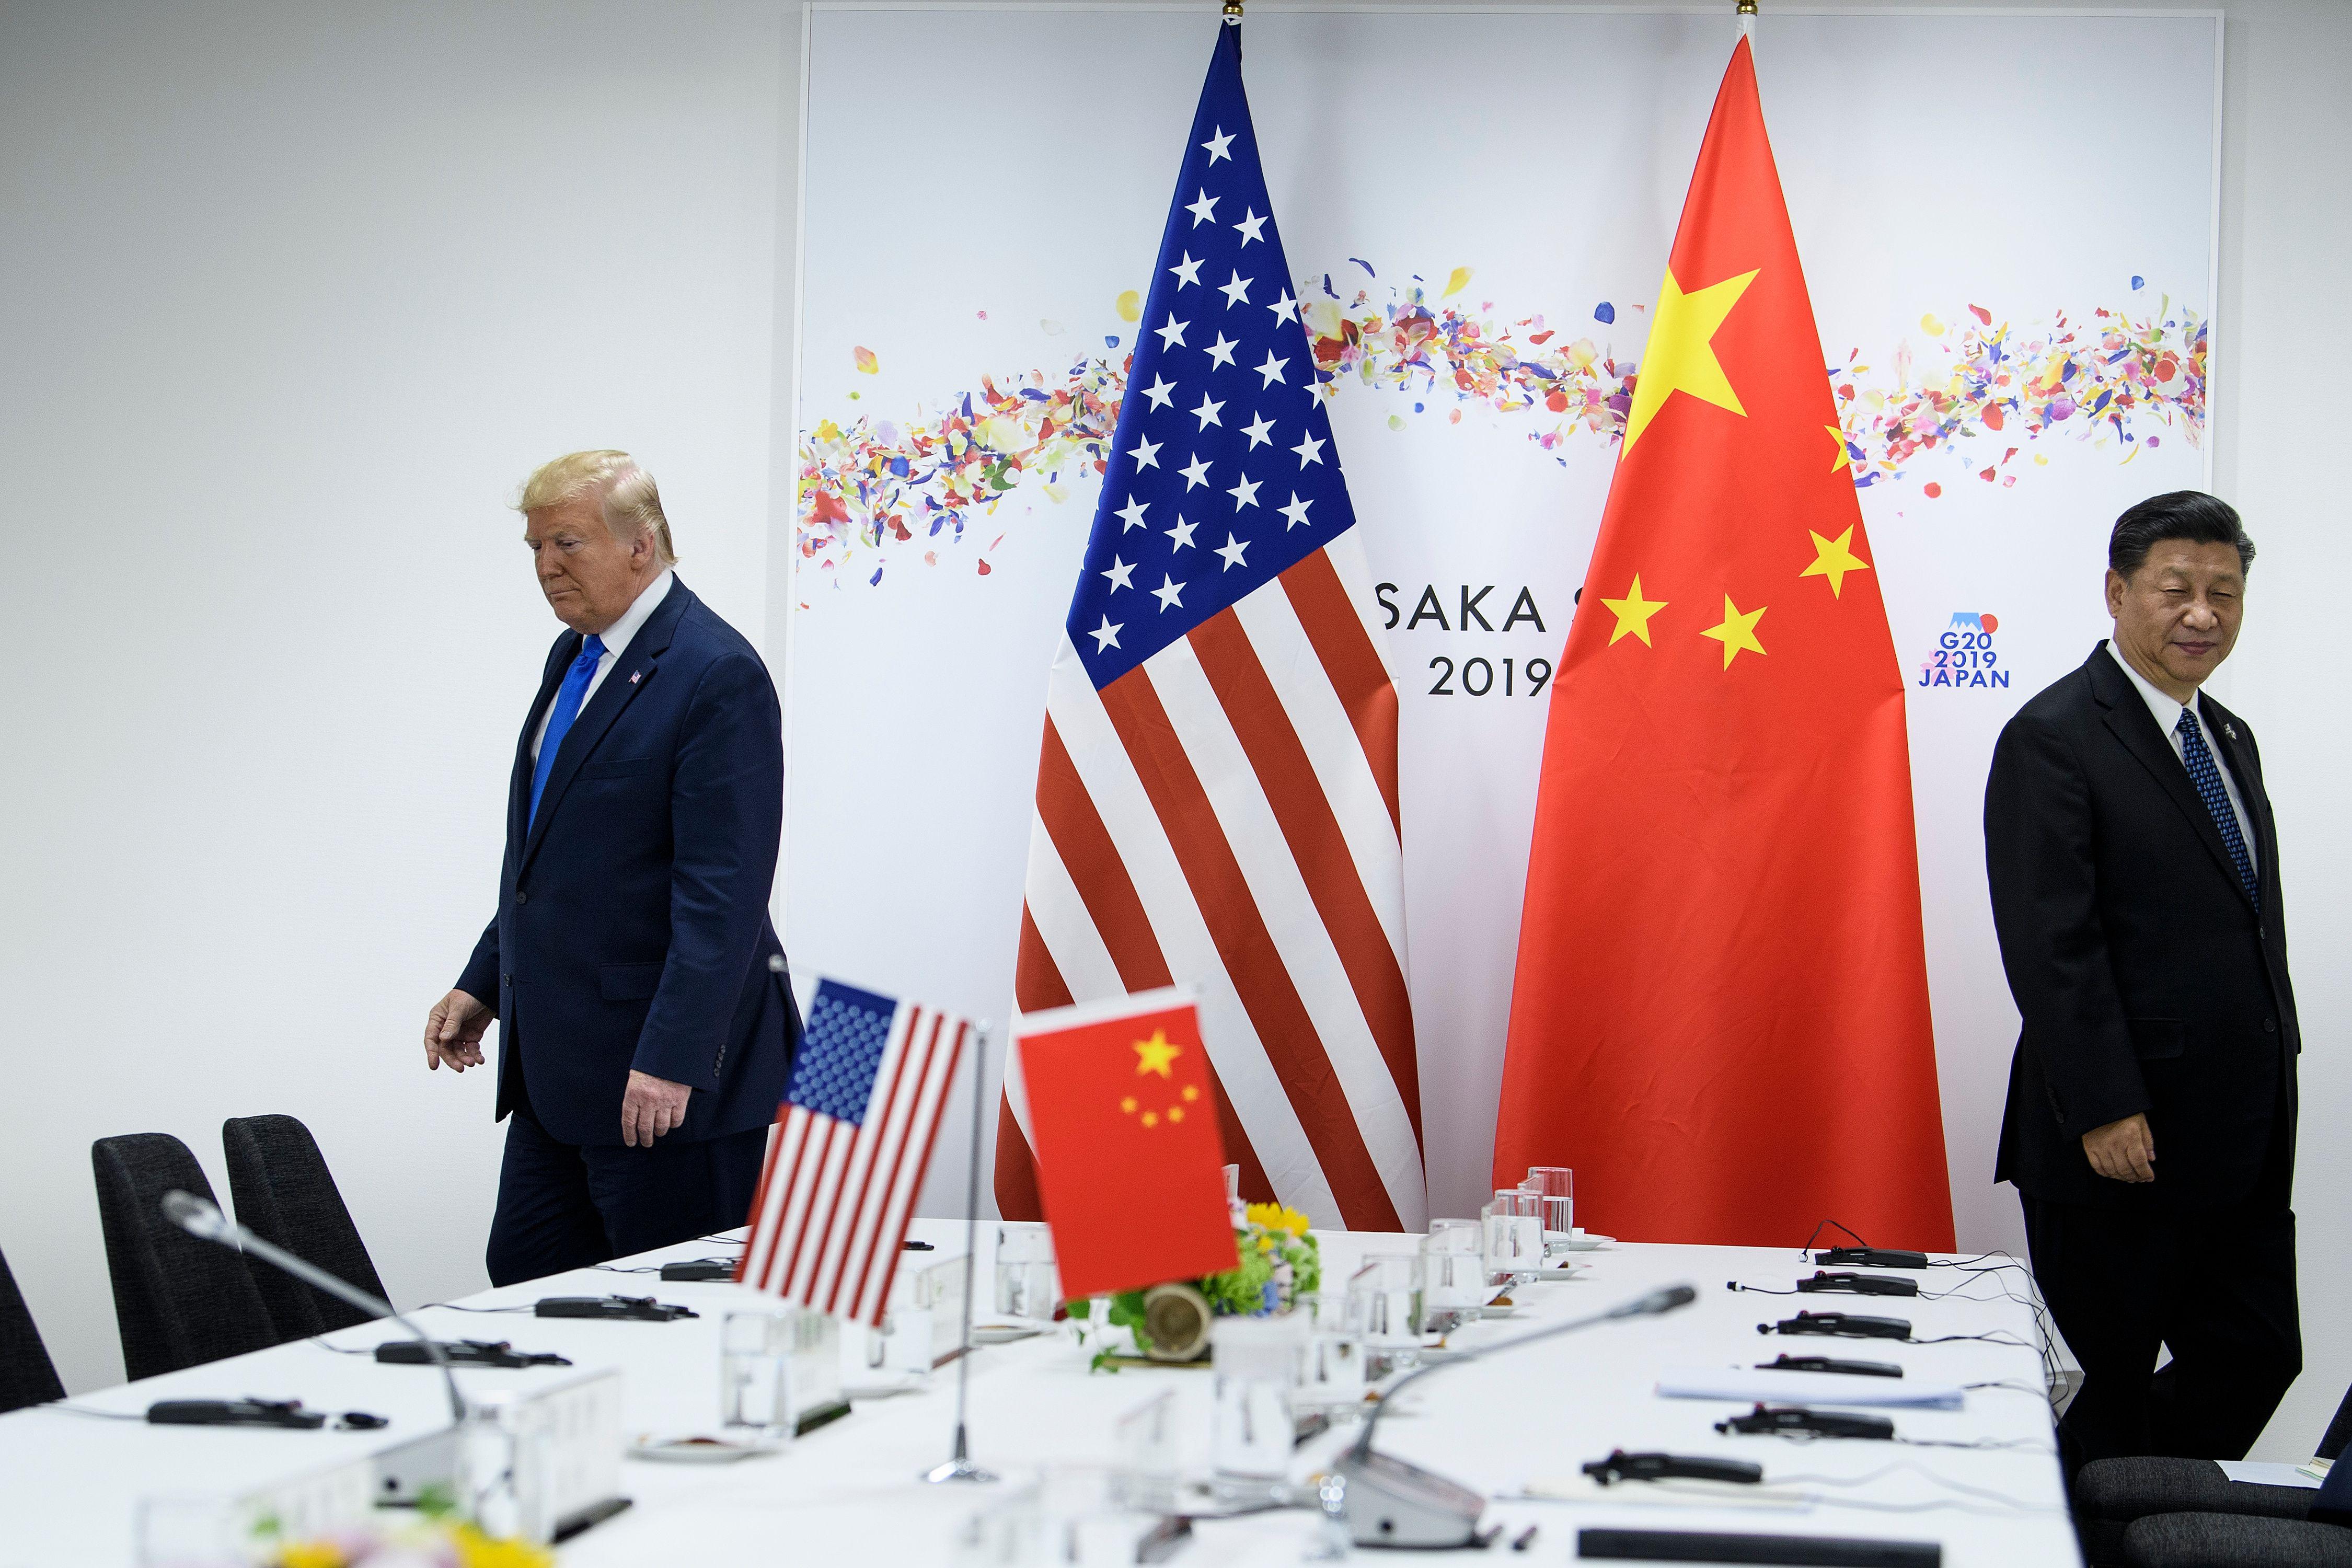  Donald Trump and President Xi Jinping walking different directions away from a negotiating table.